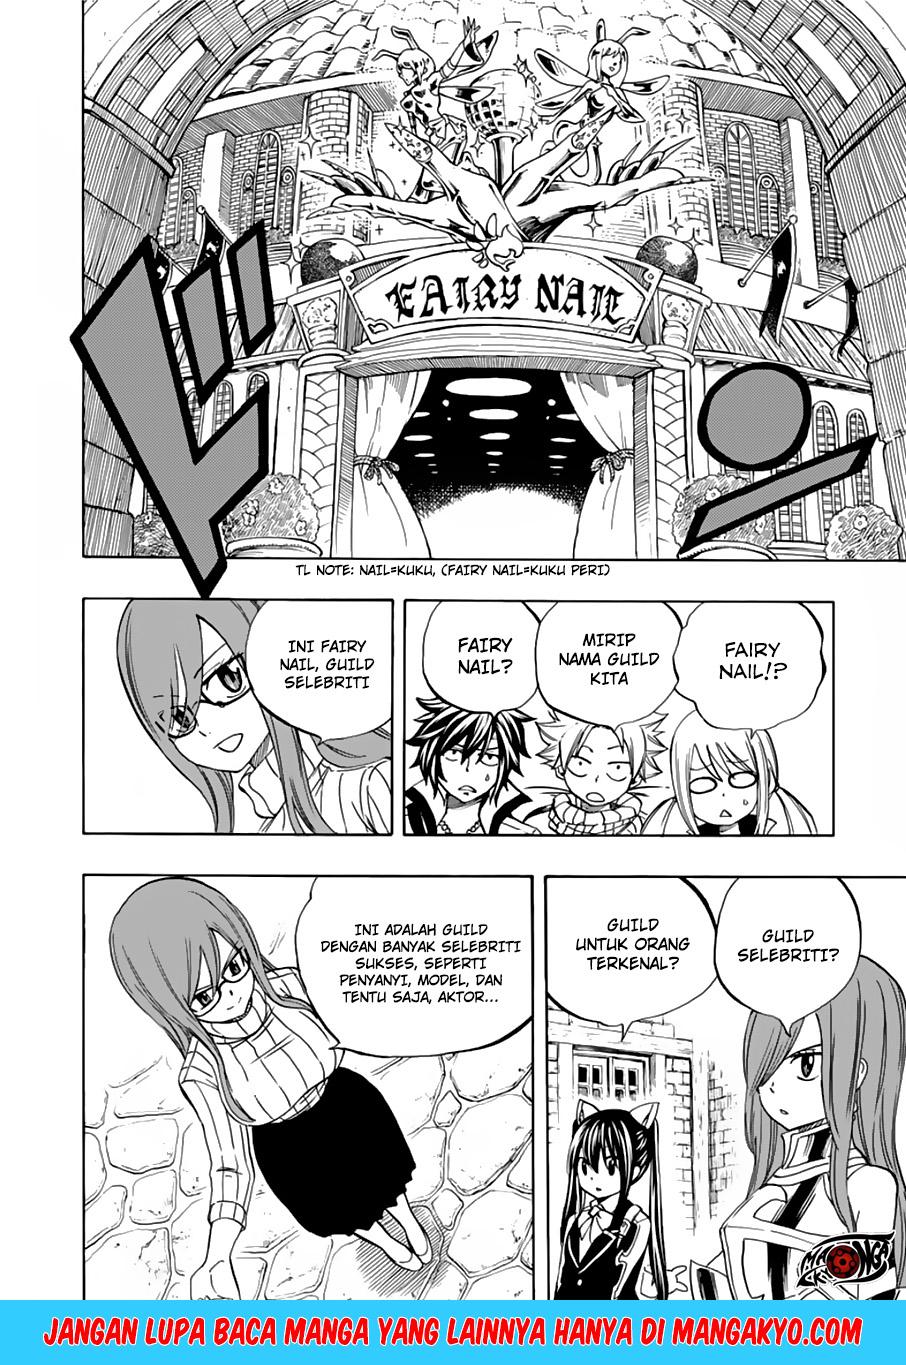 Fairy Tail: 100 Years Quest Chapter 25